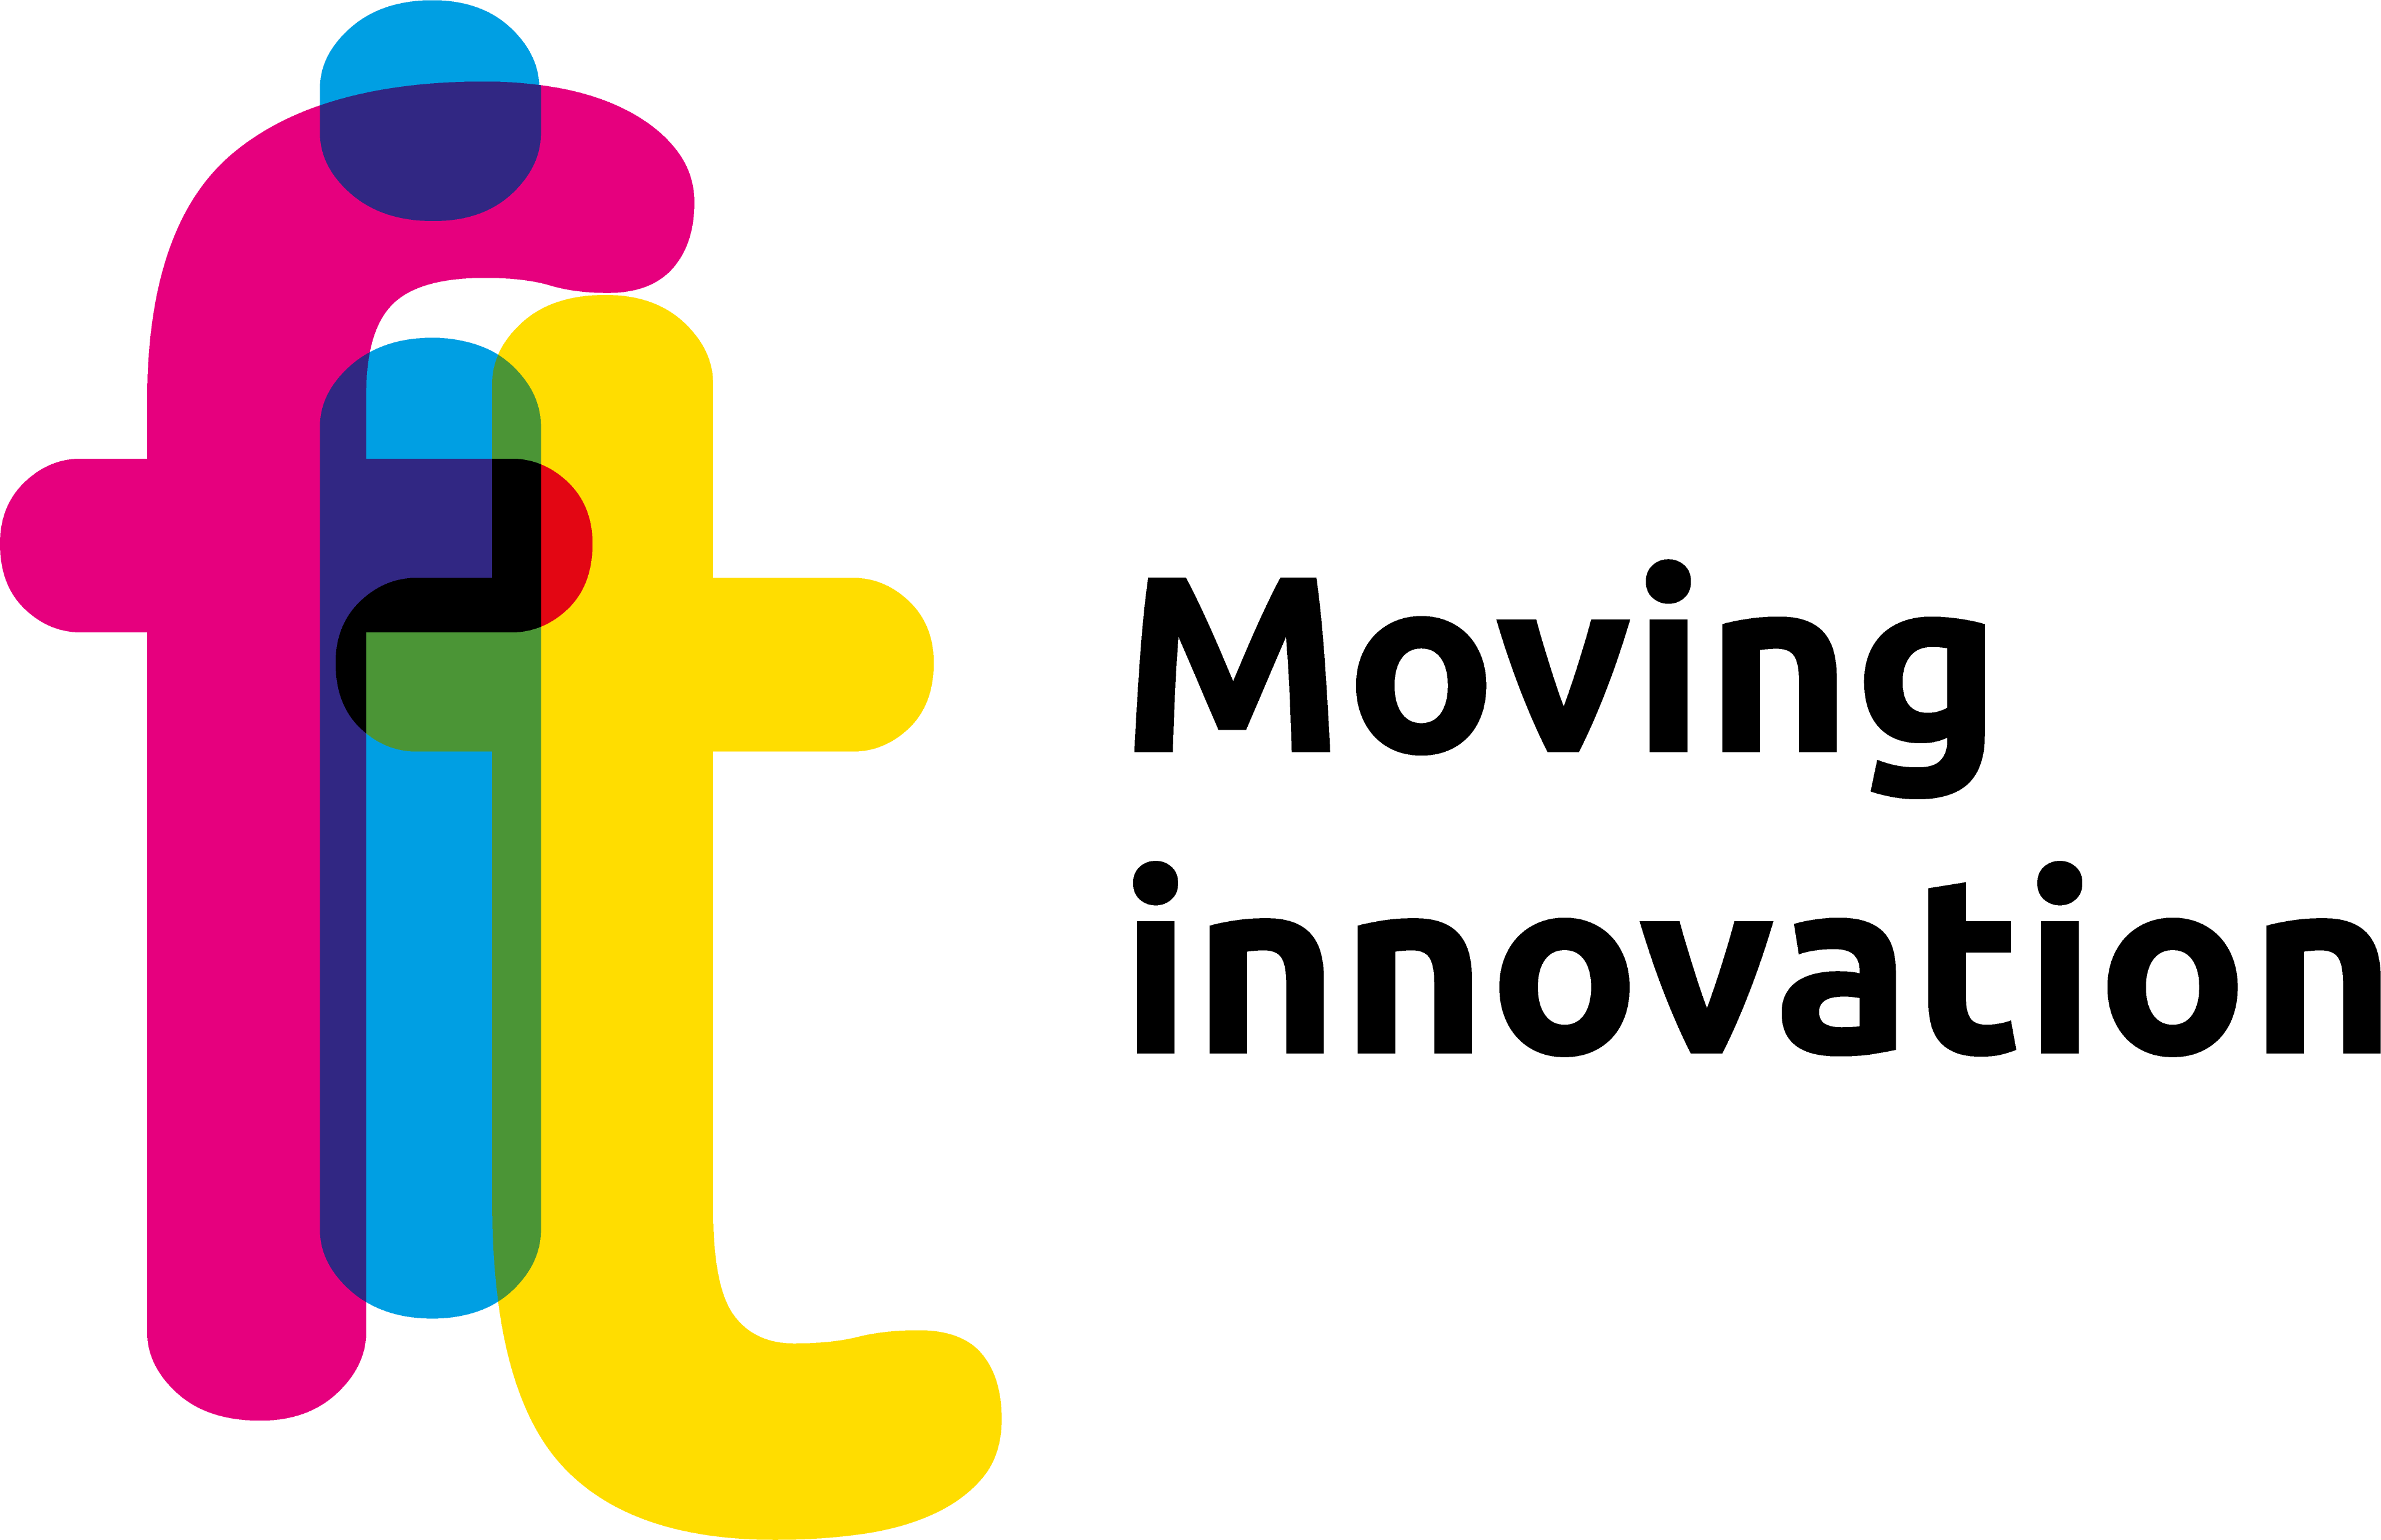 fit moving innovation